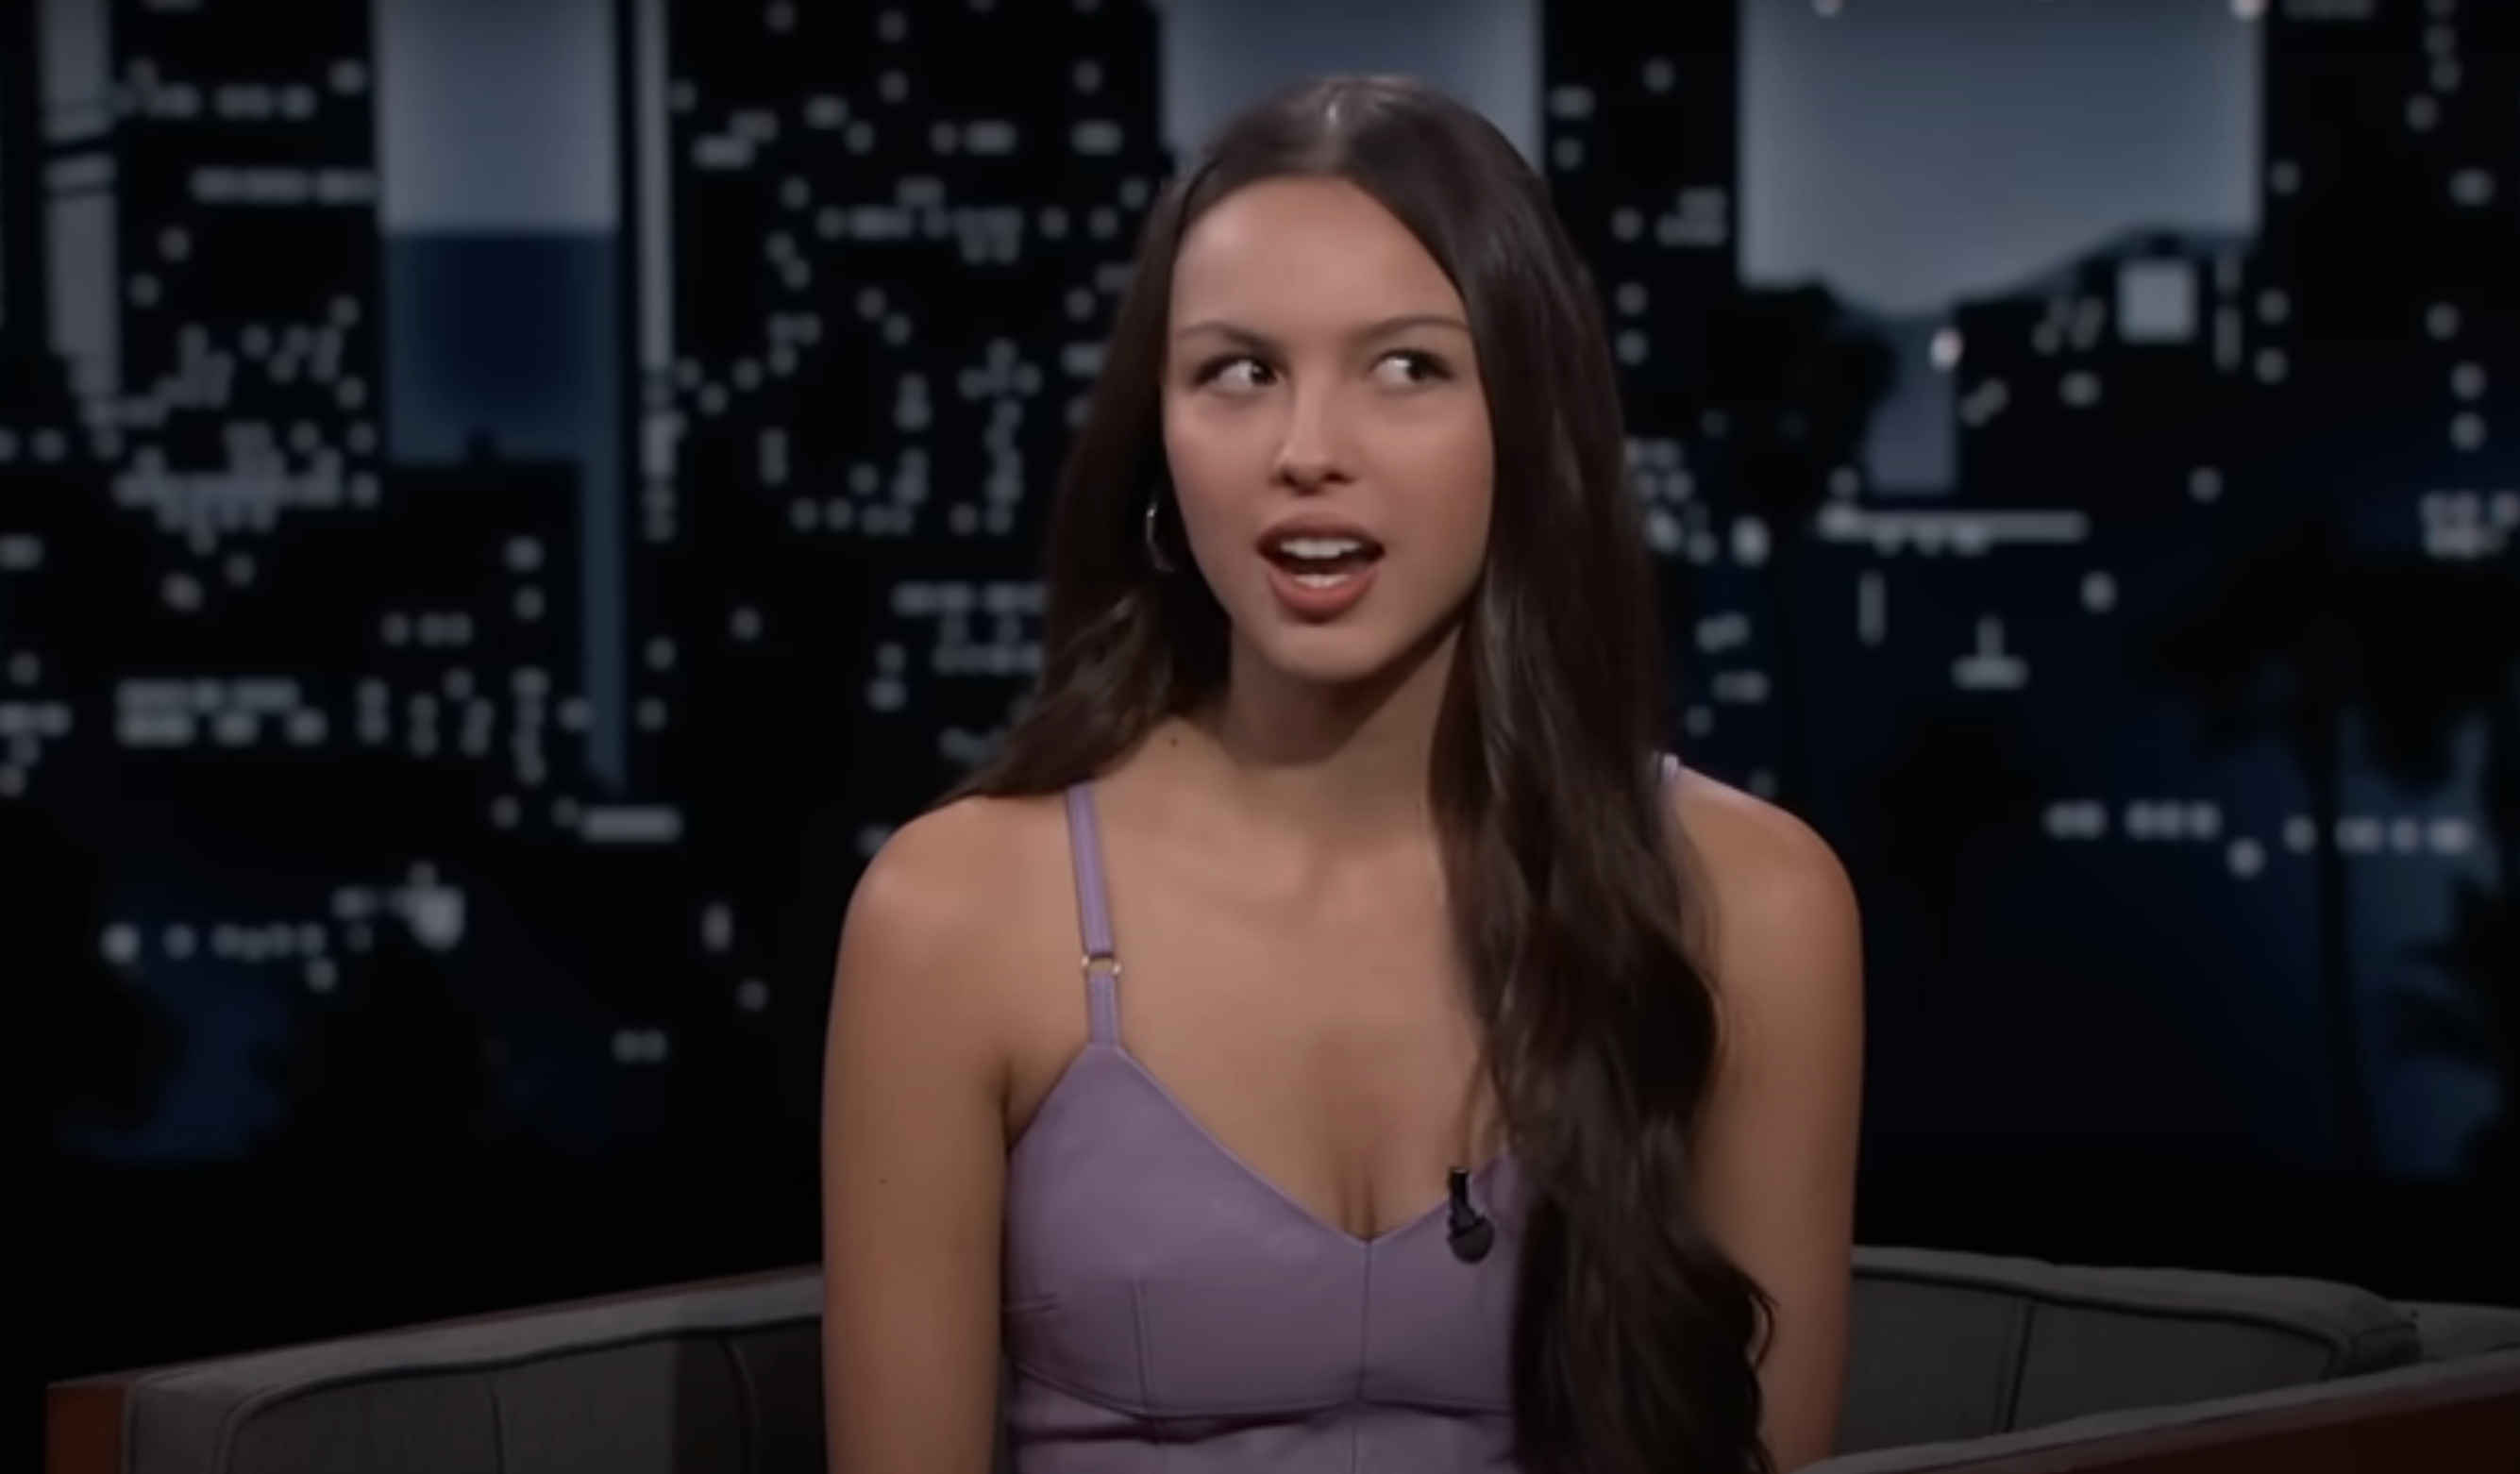 Olivia in a sleeveless dress speaking on a talk show